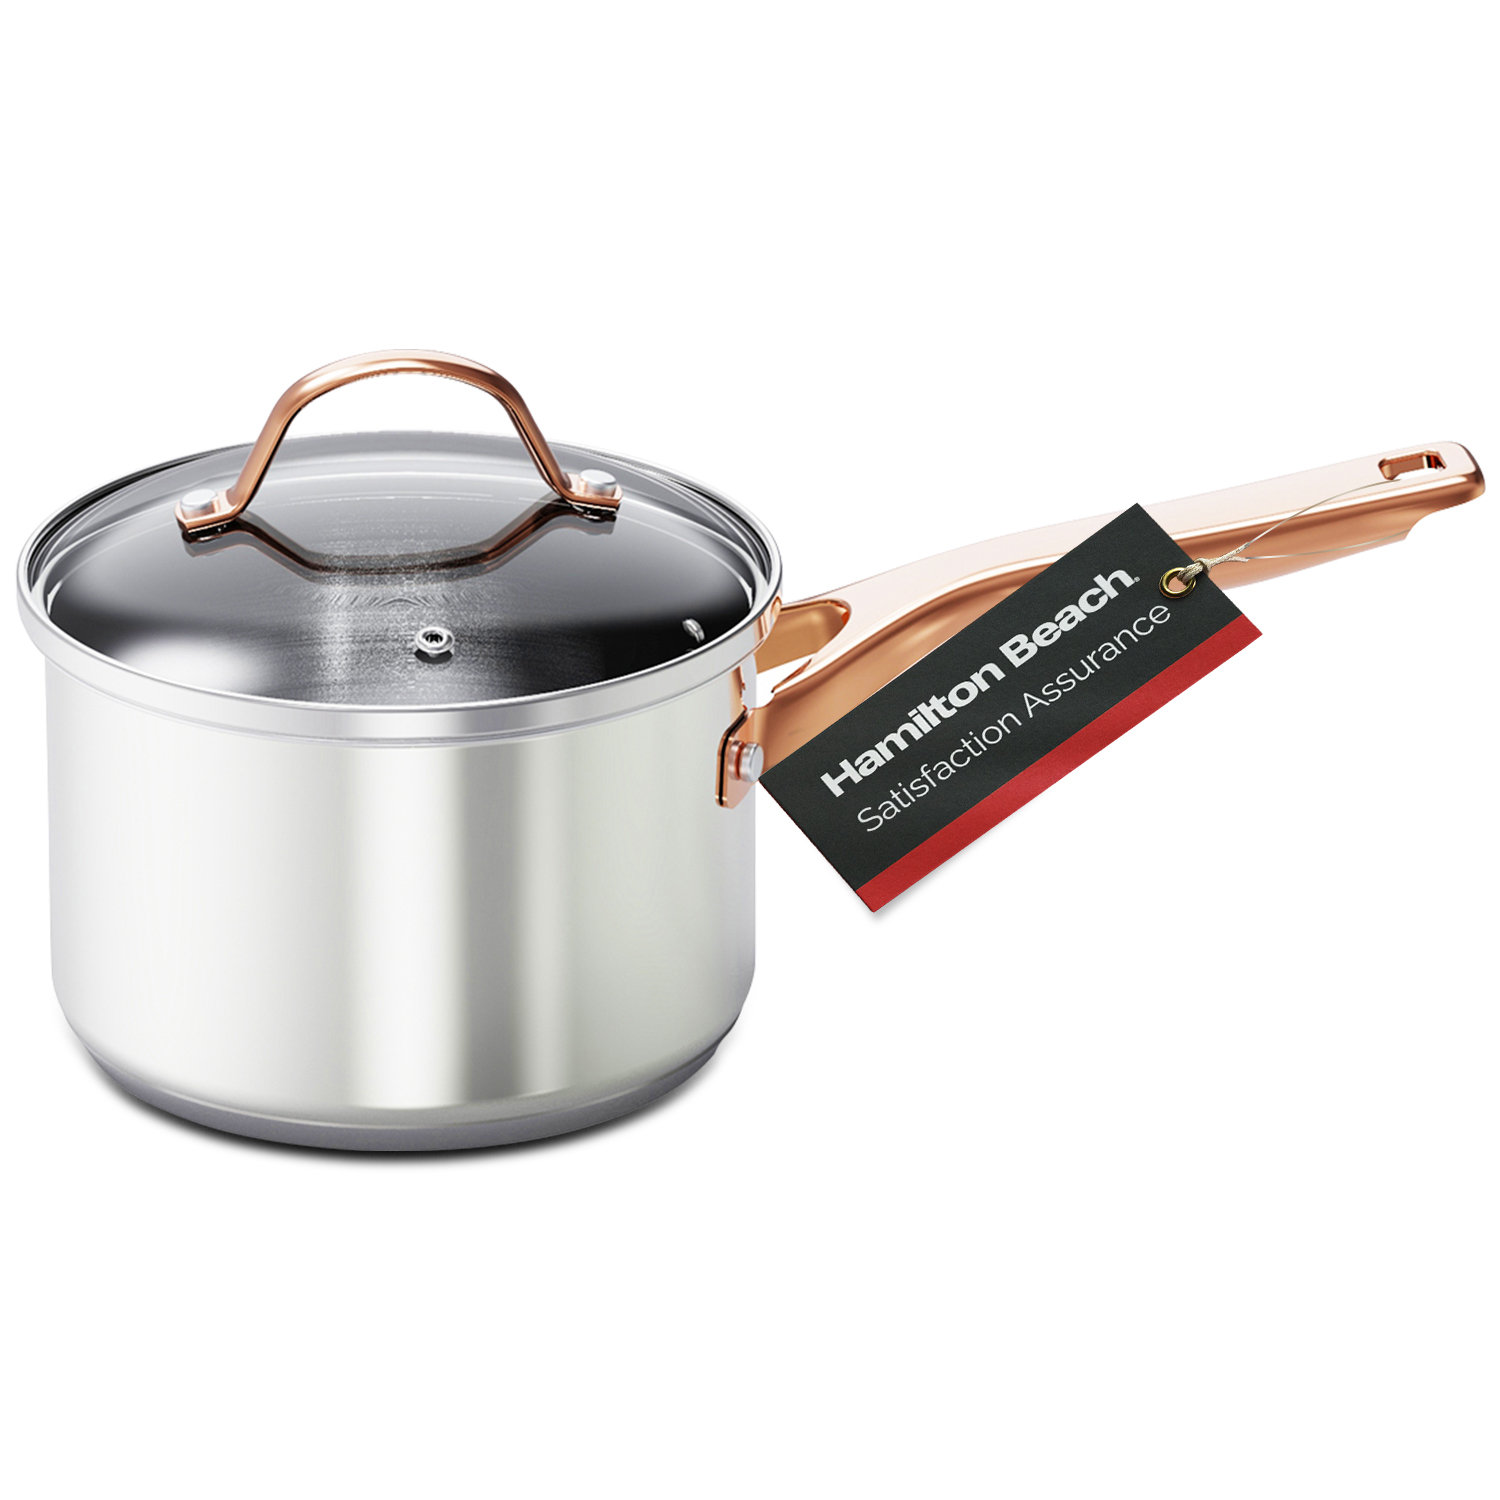 Stainless Steel Sauce Pan - Induction Ready - Round - Silver - 2Qt. - 1  Count Box